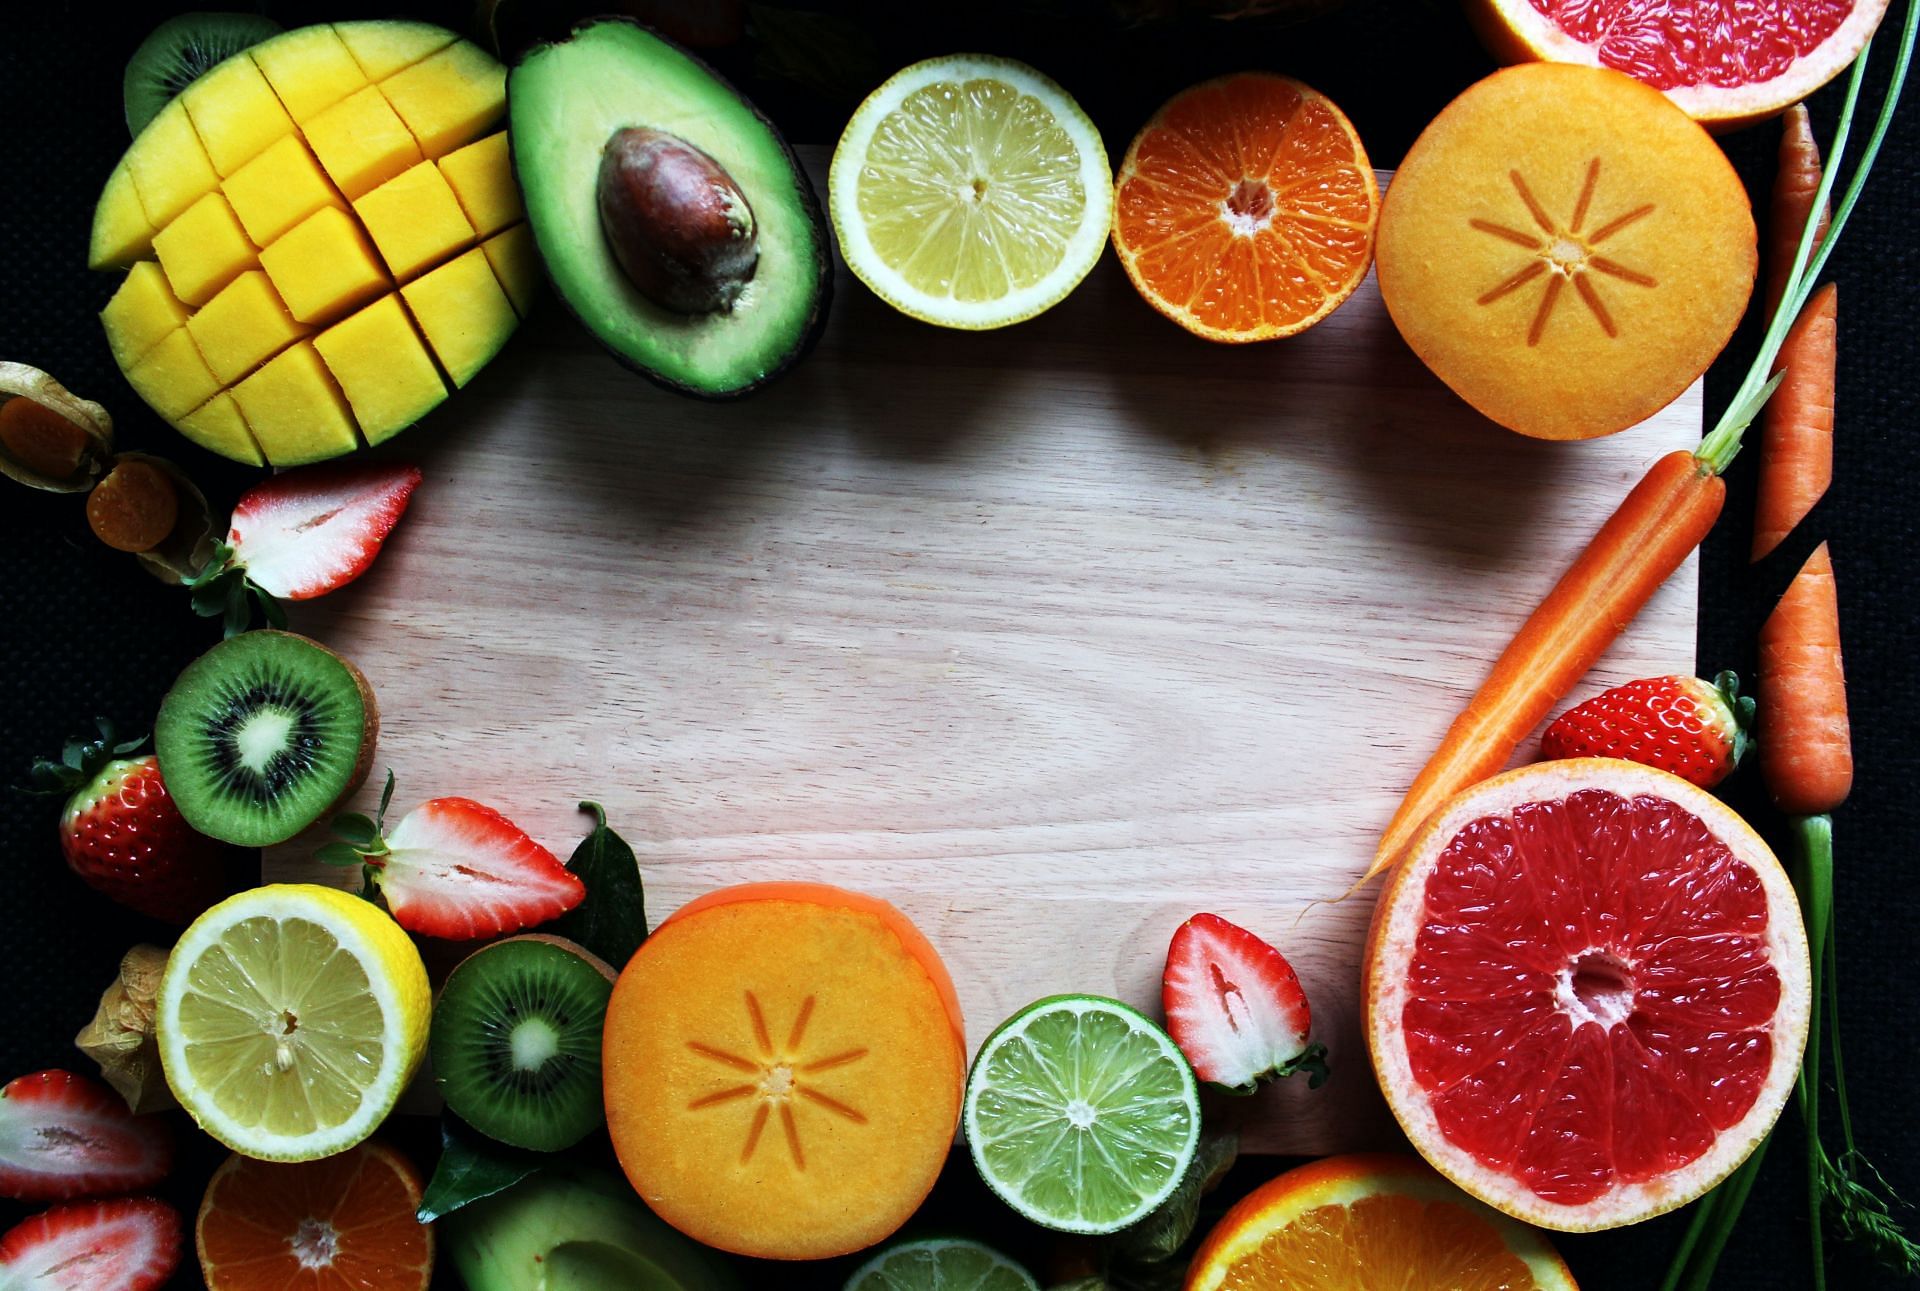 Citrus fruits must be avoided in an acid reflux diet (Image via Unsplash/Amoon Ra)